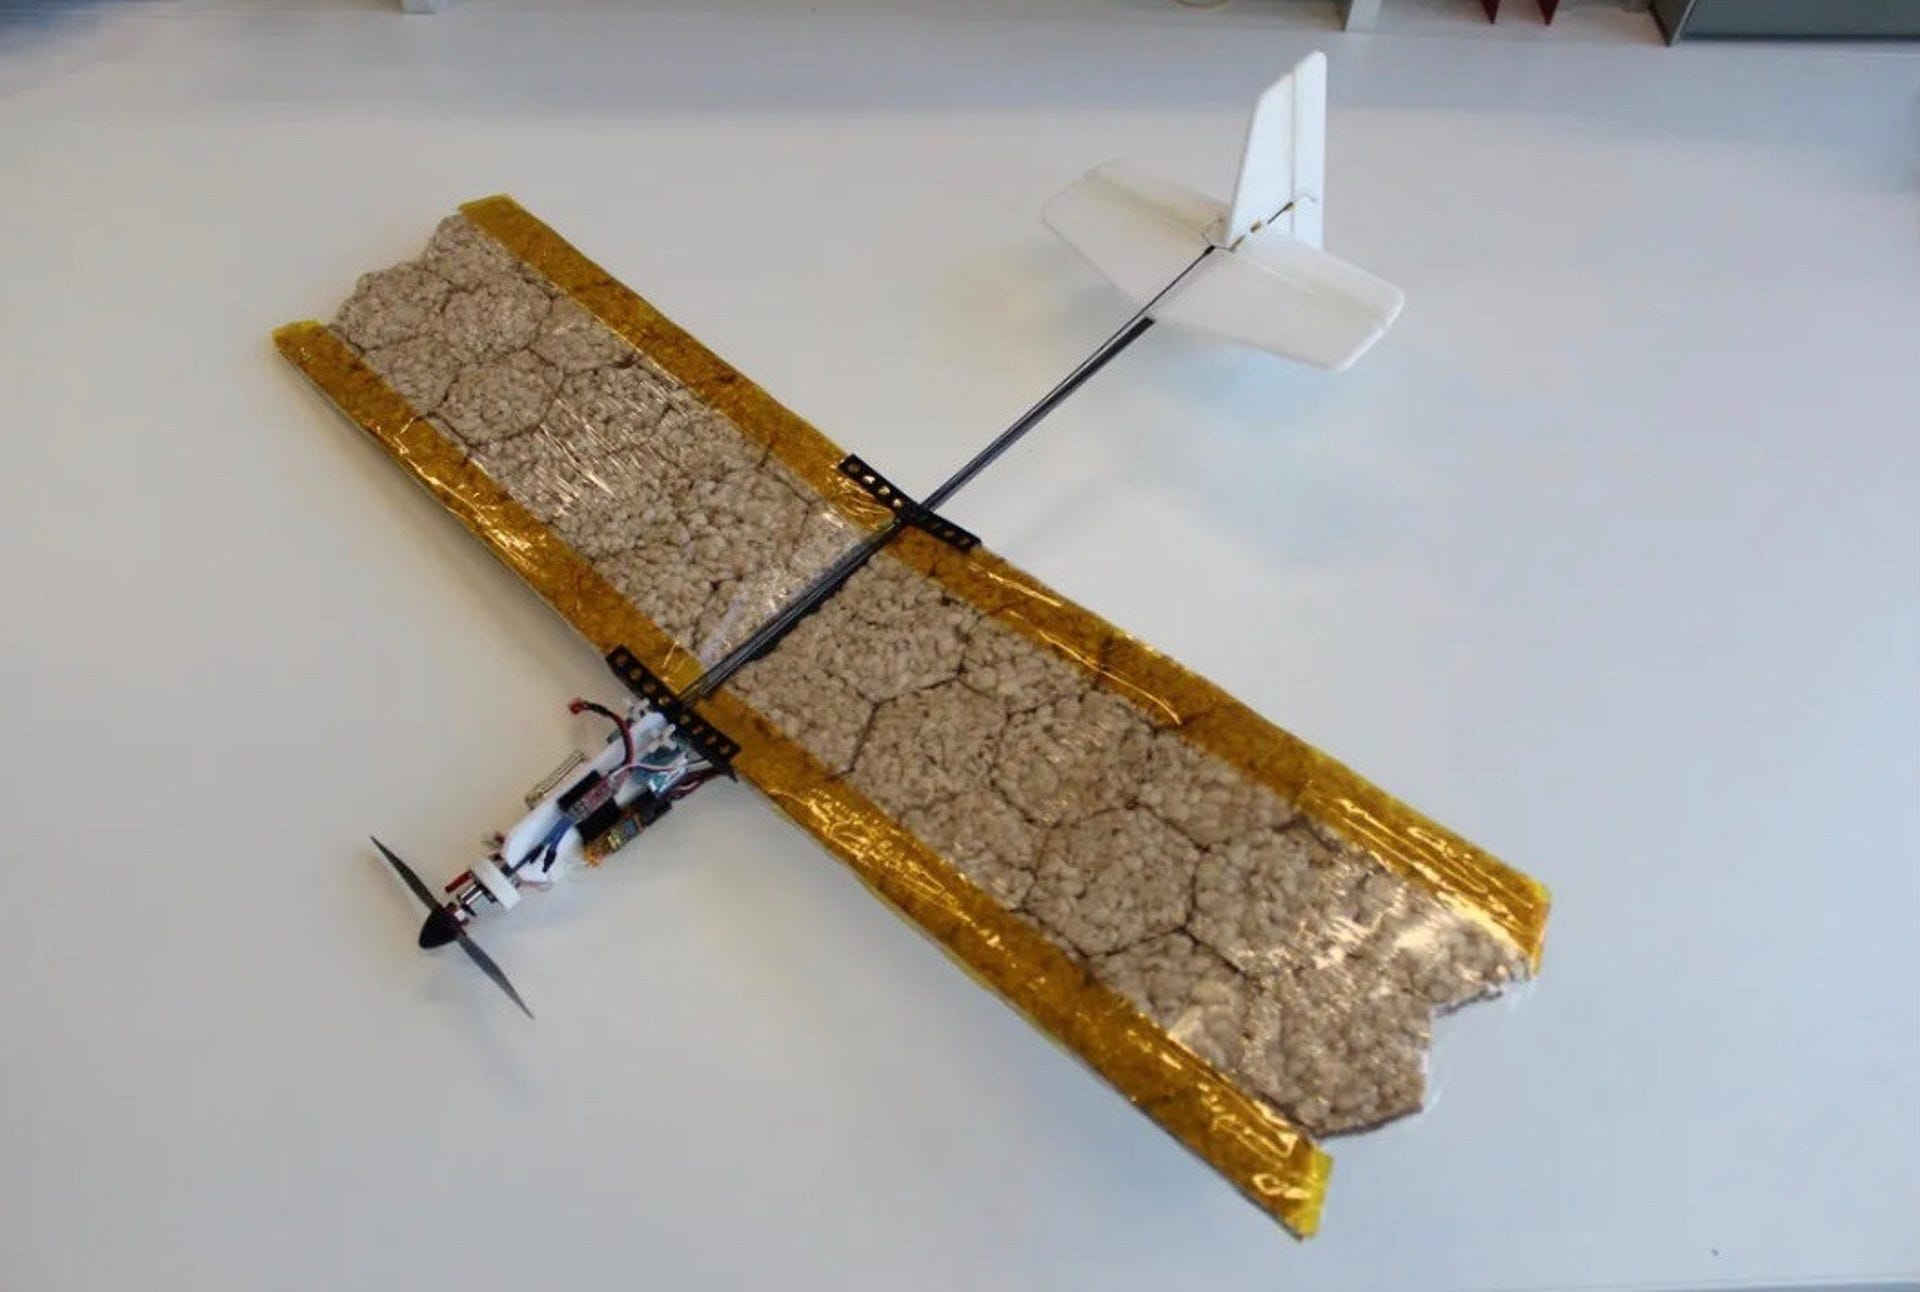 A propeller drone with wings made of rice cakes like a tiny edible airplane.